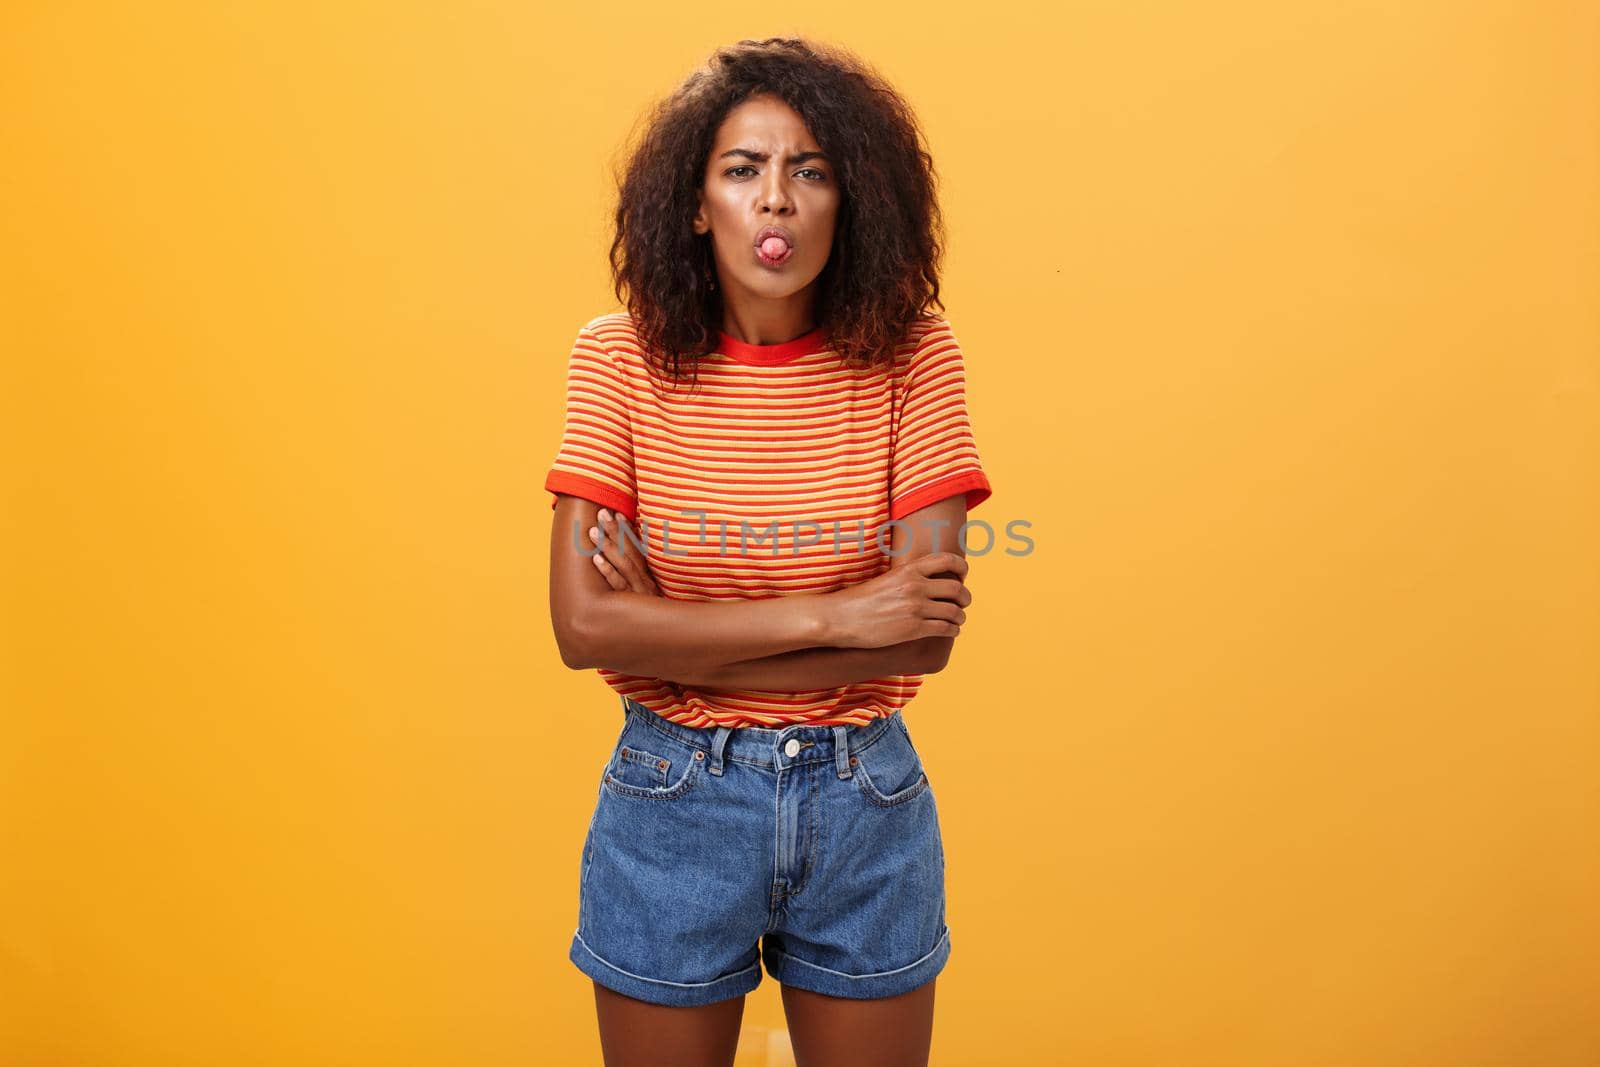 Immature girl showing bad side of character. Portrait of childish offended or displeased young African-American woman with curly hair showing tongue crossing arms on chest over orange background by Benzoix